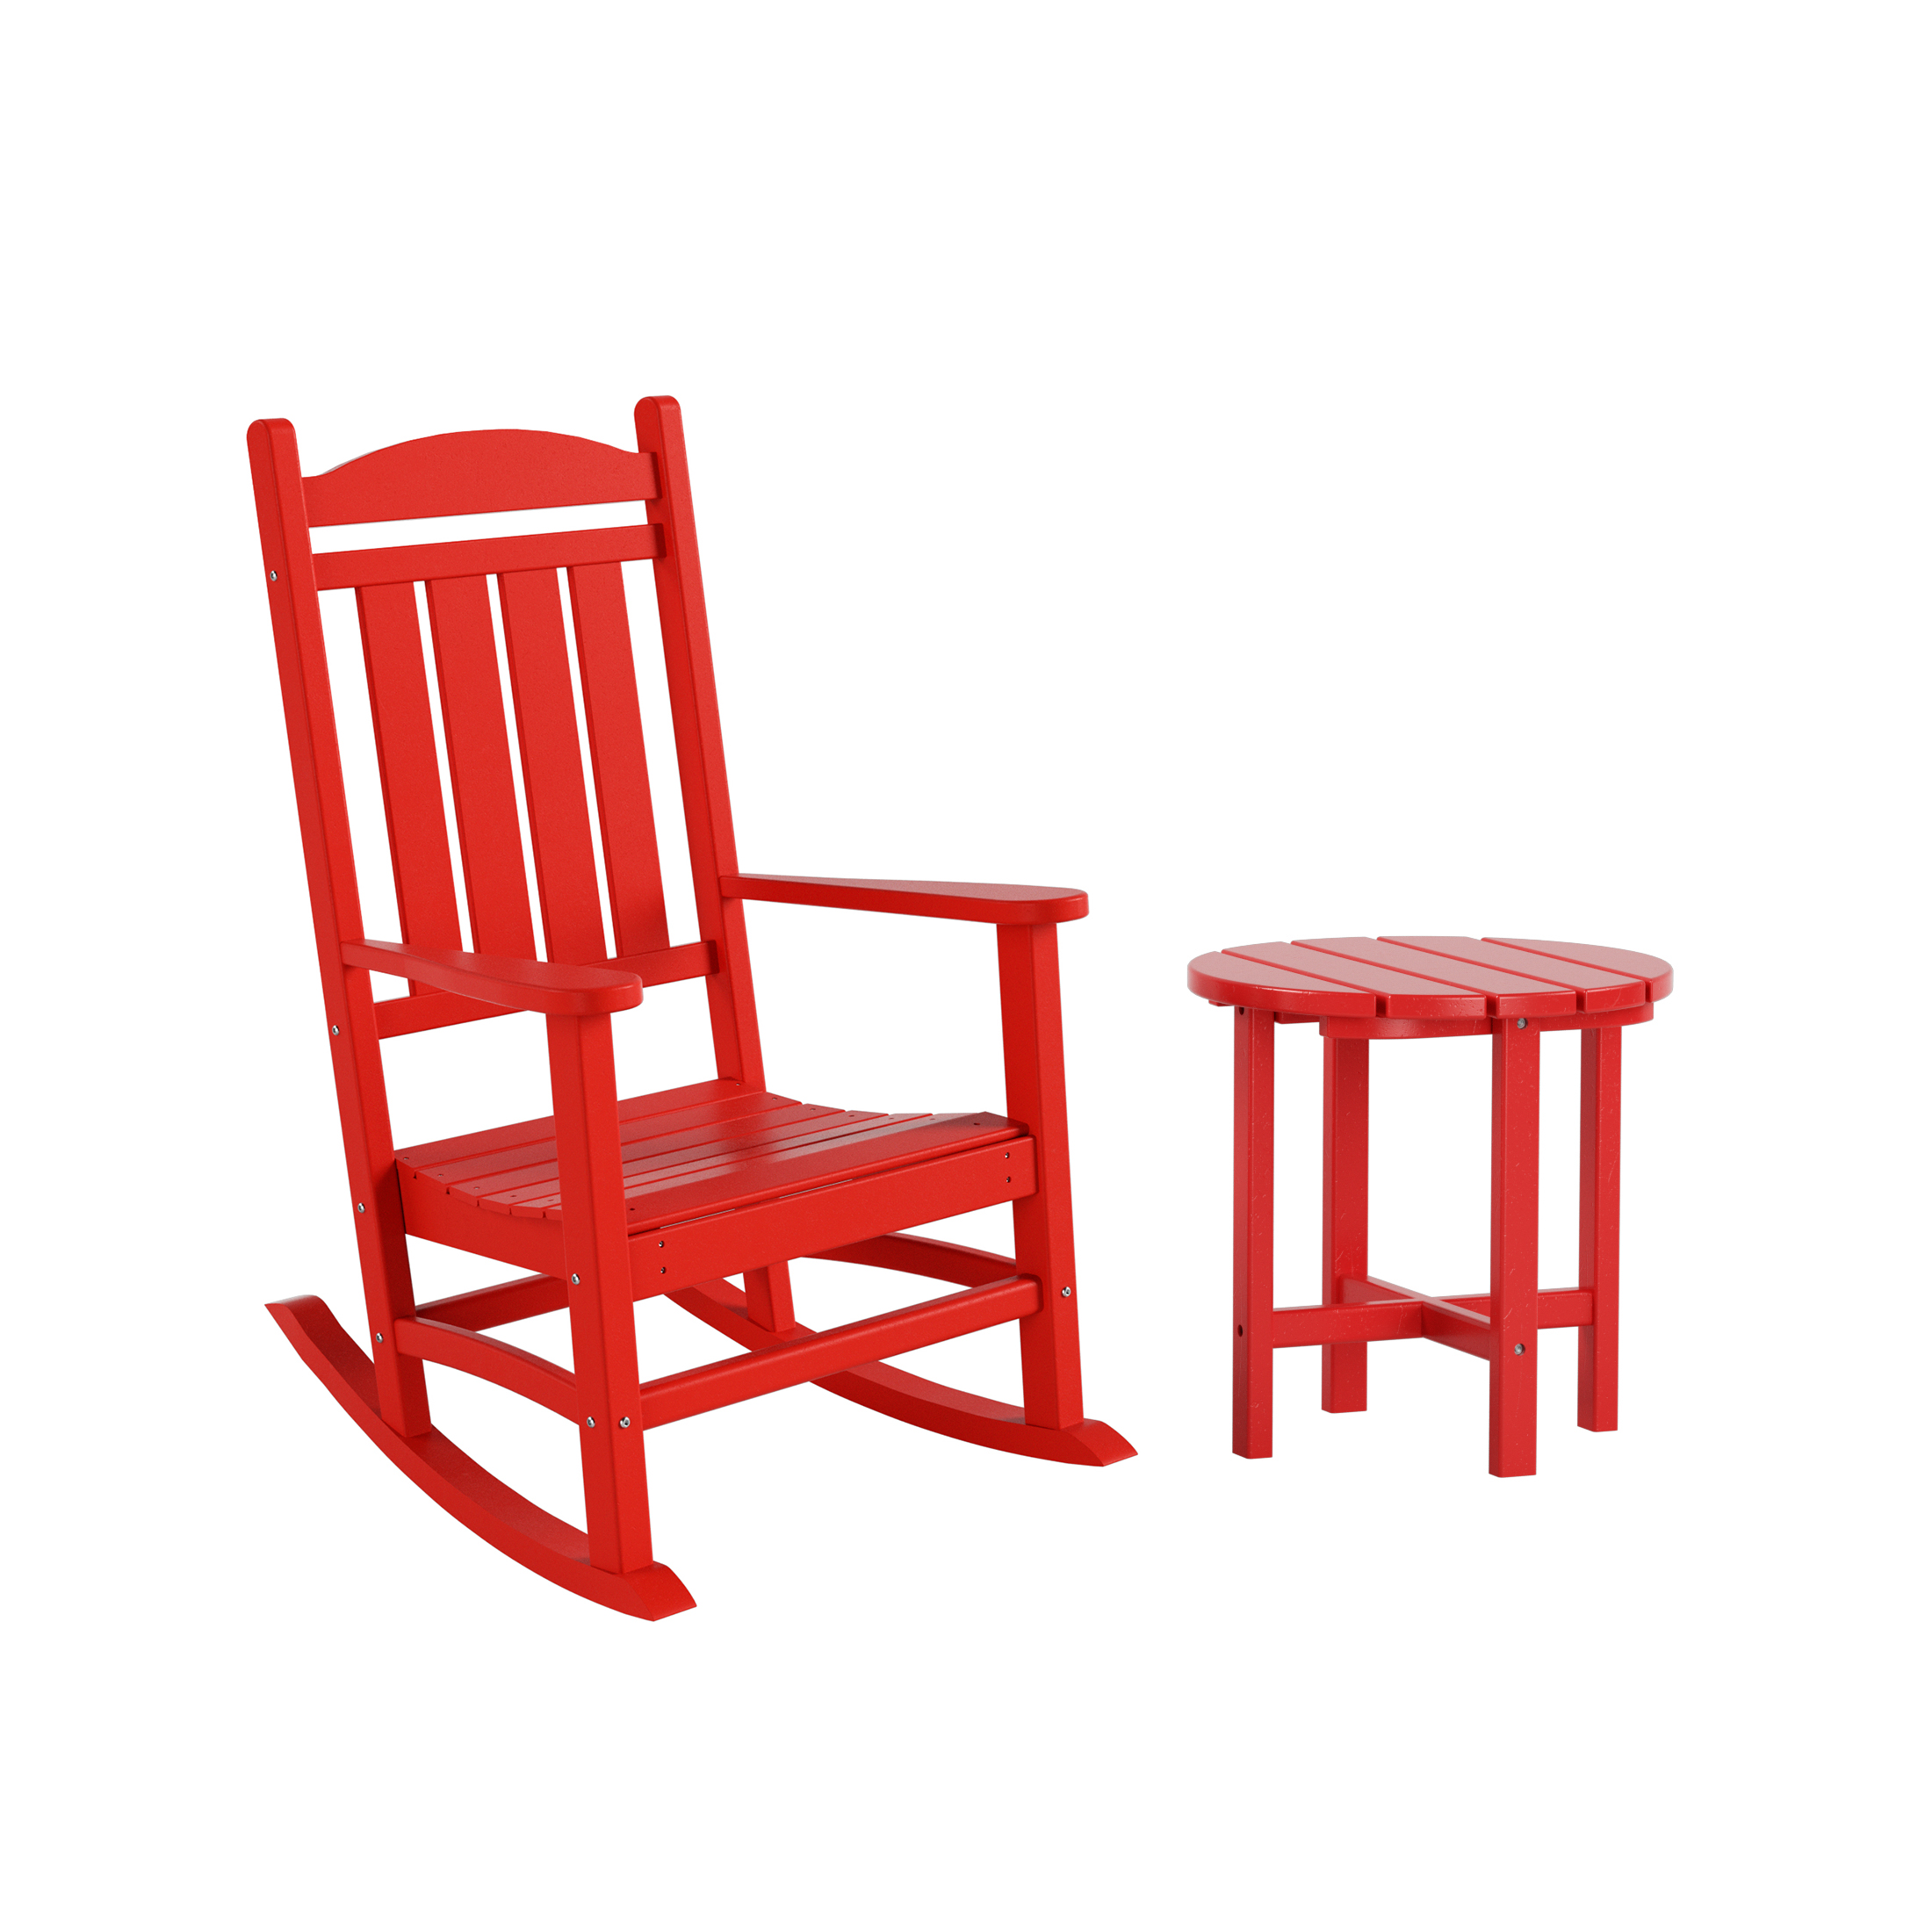 GARDEN 2-Piece Set Classic Plastic Porch Rocking Chair with Round Side Table Included, Red - image 2 of 7